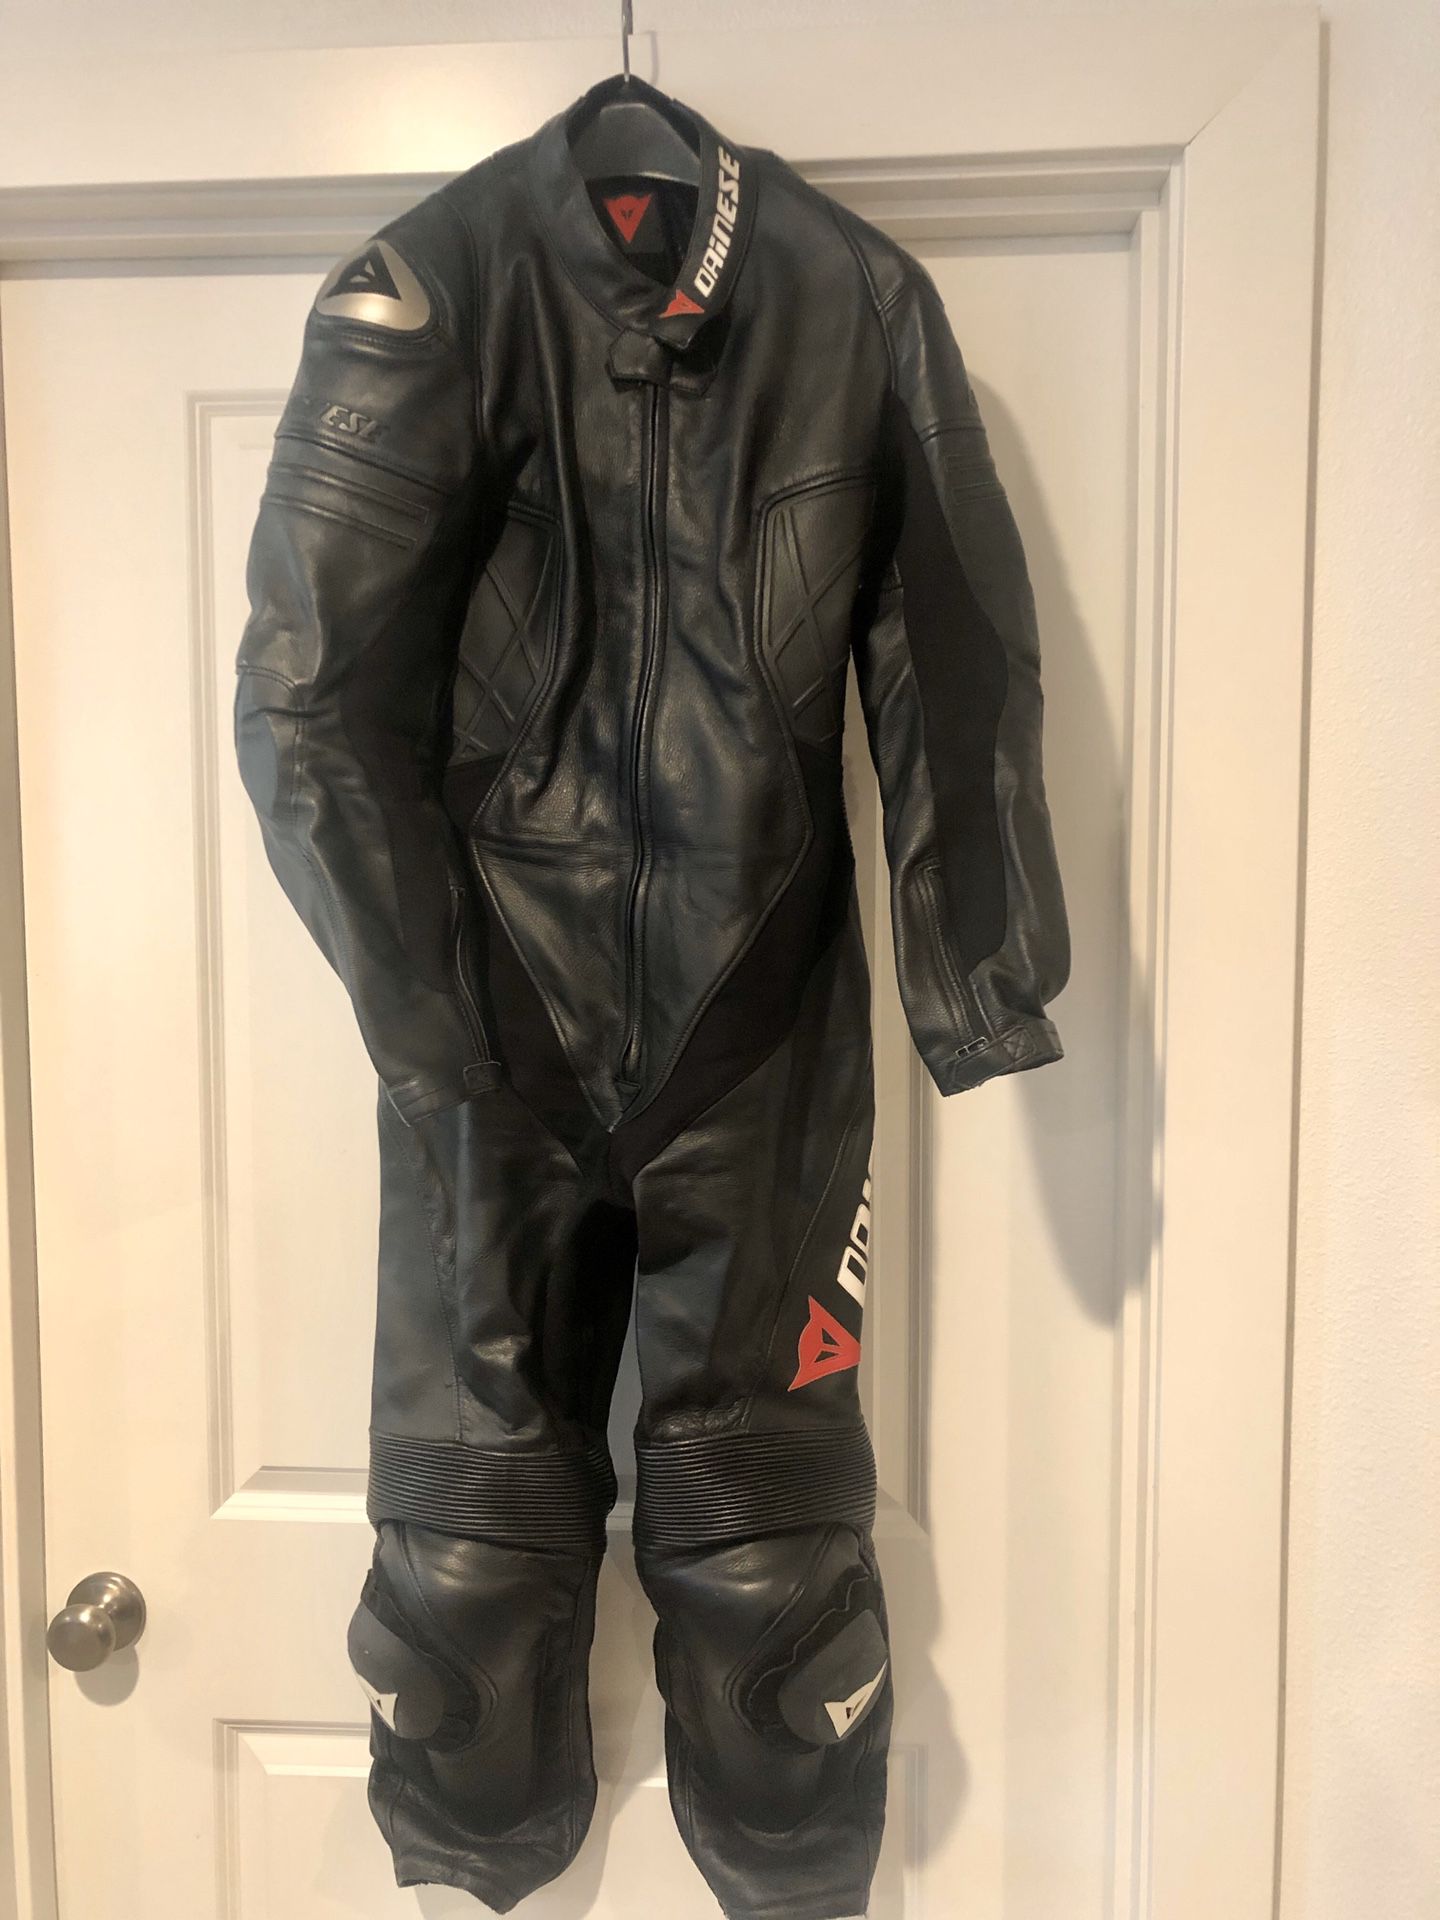 Dainese leather suit